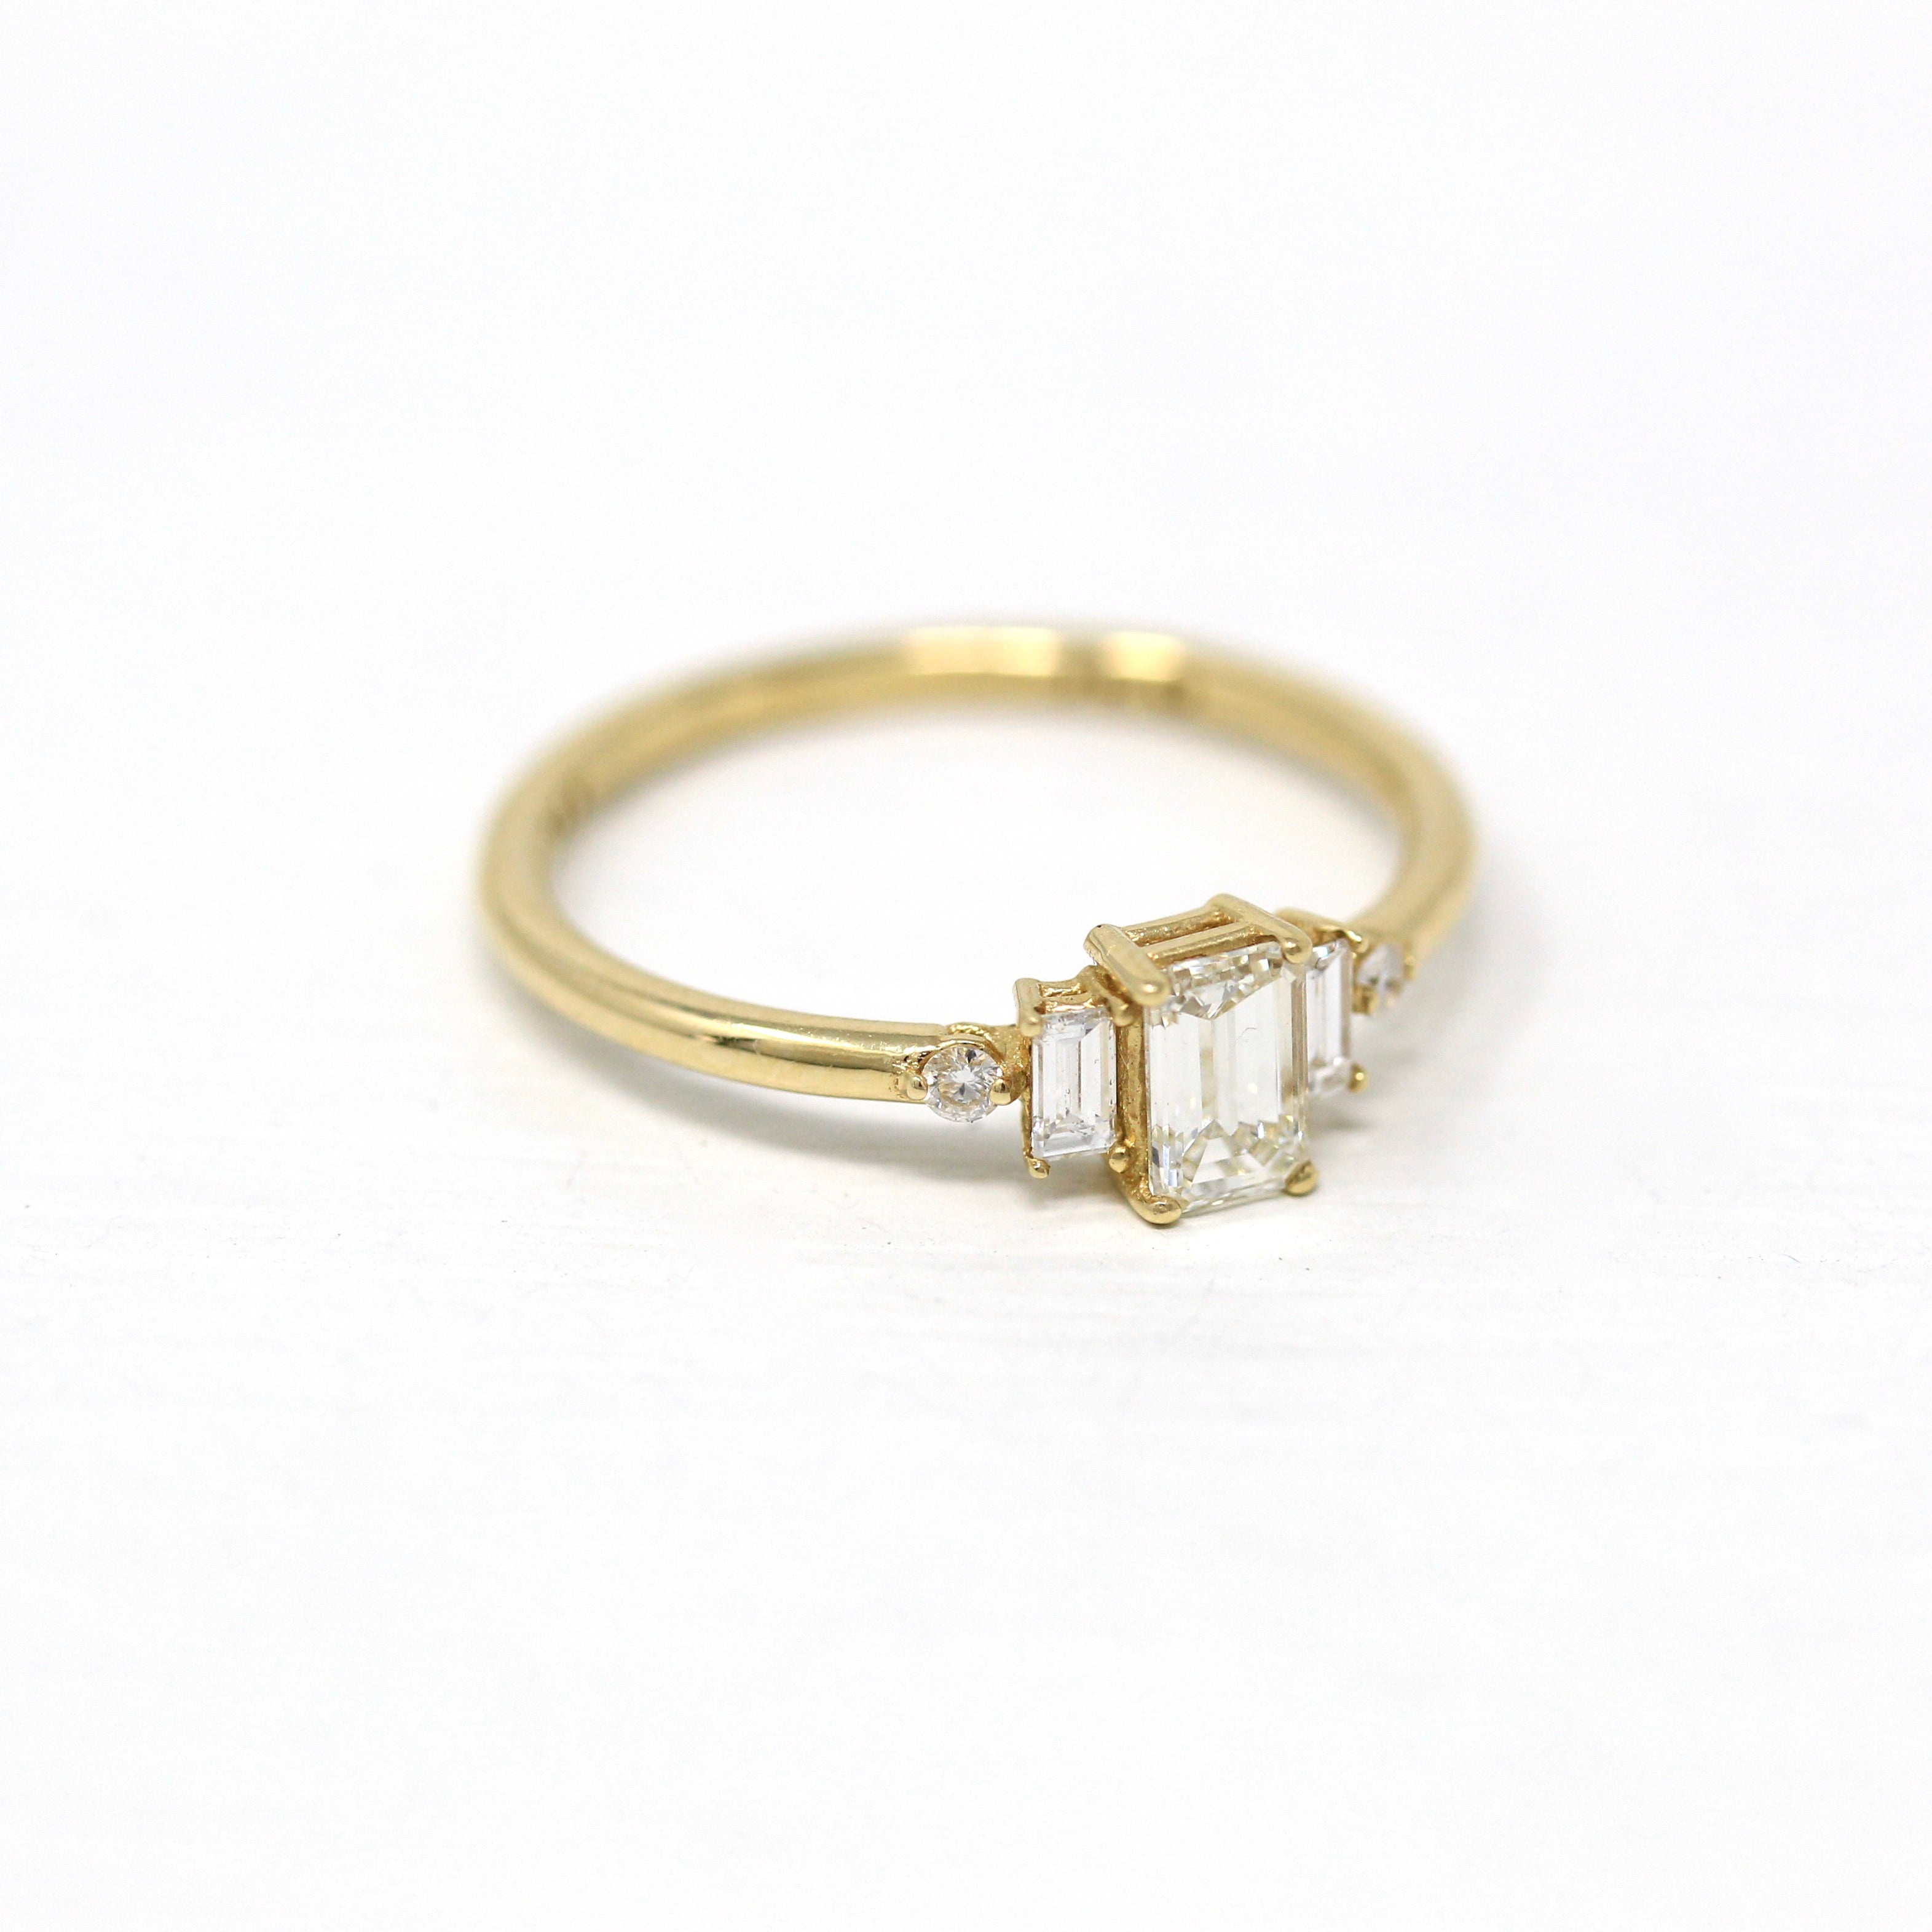 Buy Twist Engagement Ring, 14K Yellow Gold Ring, Unique Diamond Ring, Modern  Diamond Ring, Twisted Diamond Ring, Delicate Engagement Ring Online in  India - Etsy